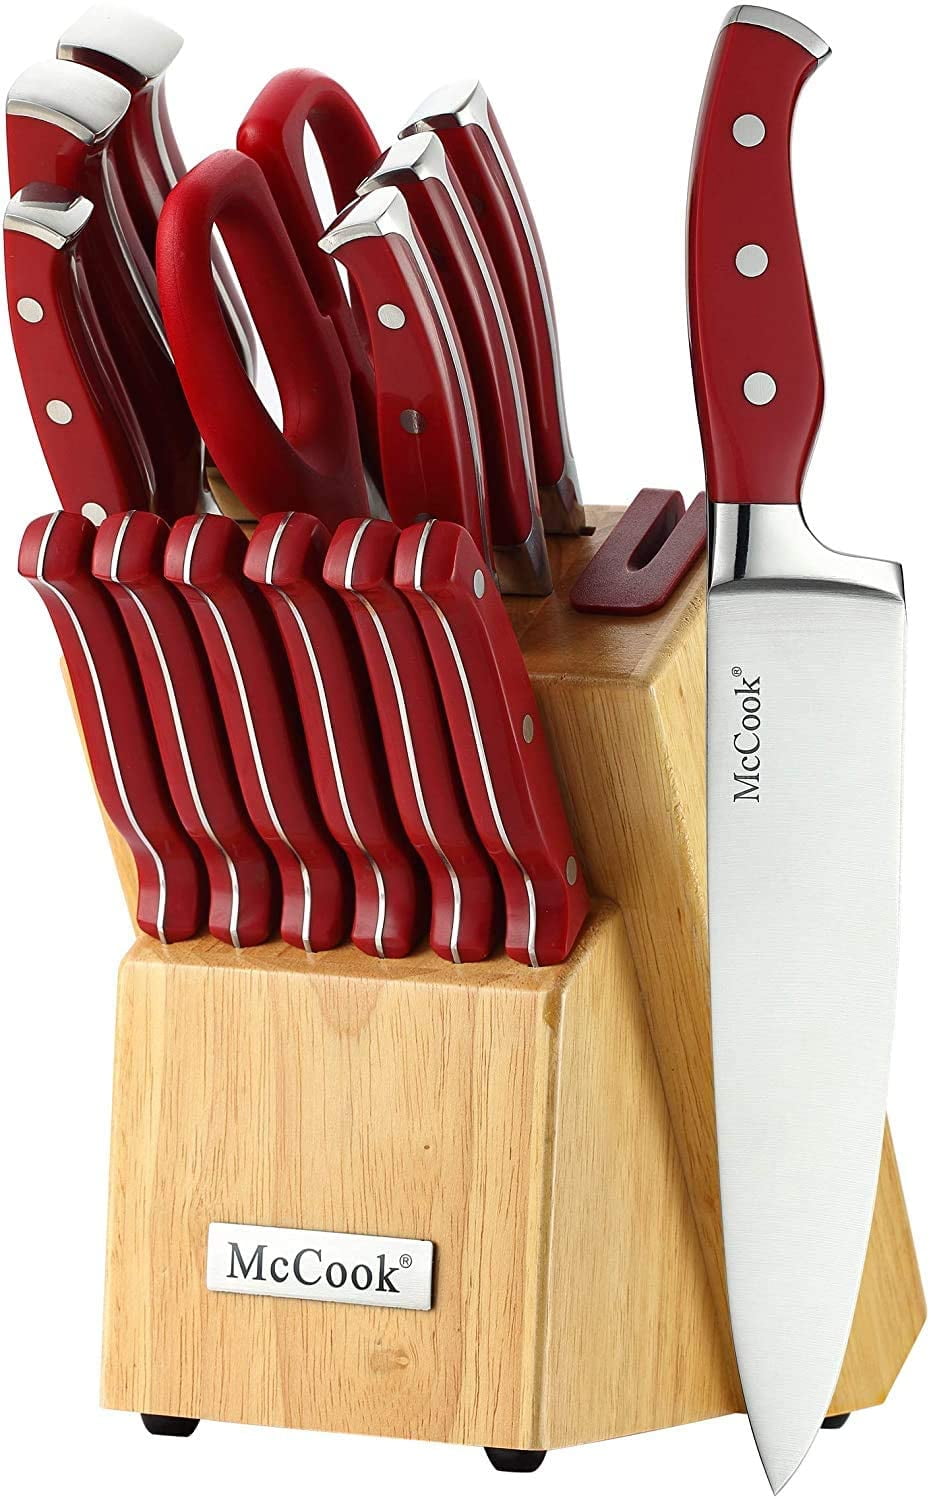 McCook MC24 15 Pieces Stainless Steel Kitchen Knife Sets with Wooden Block, Kitchen Scissors and Built-in Sharpener, Red